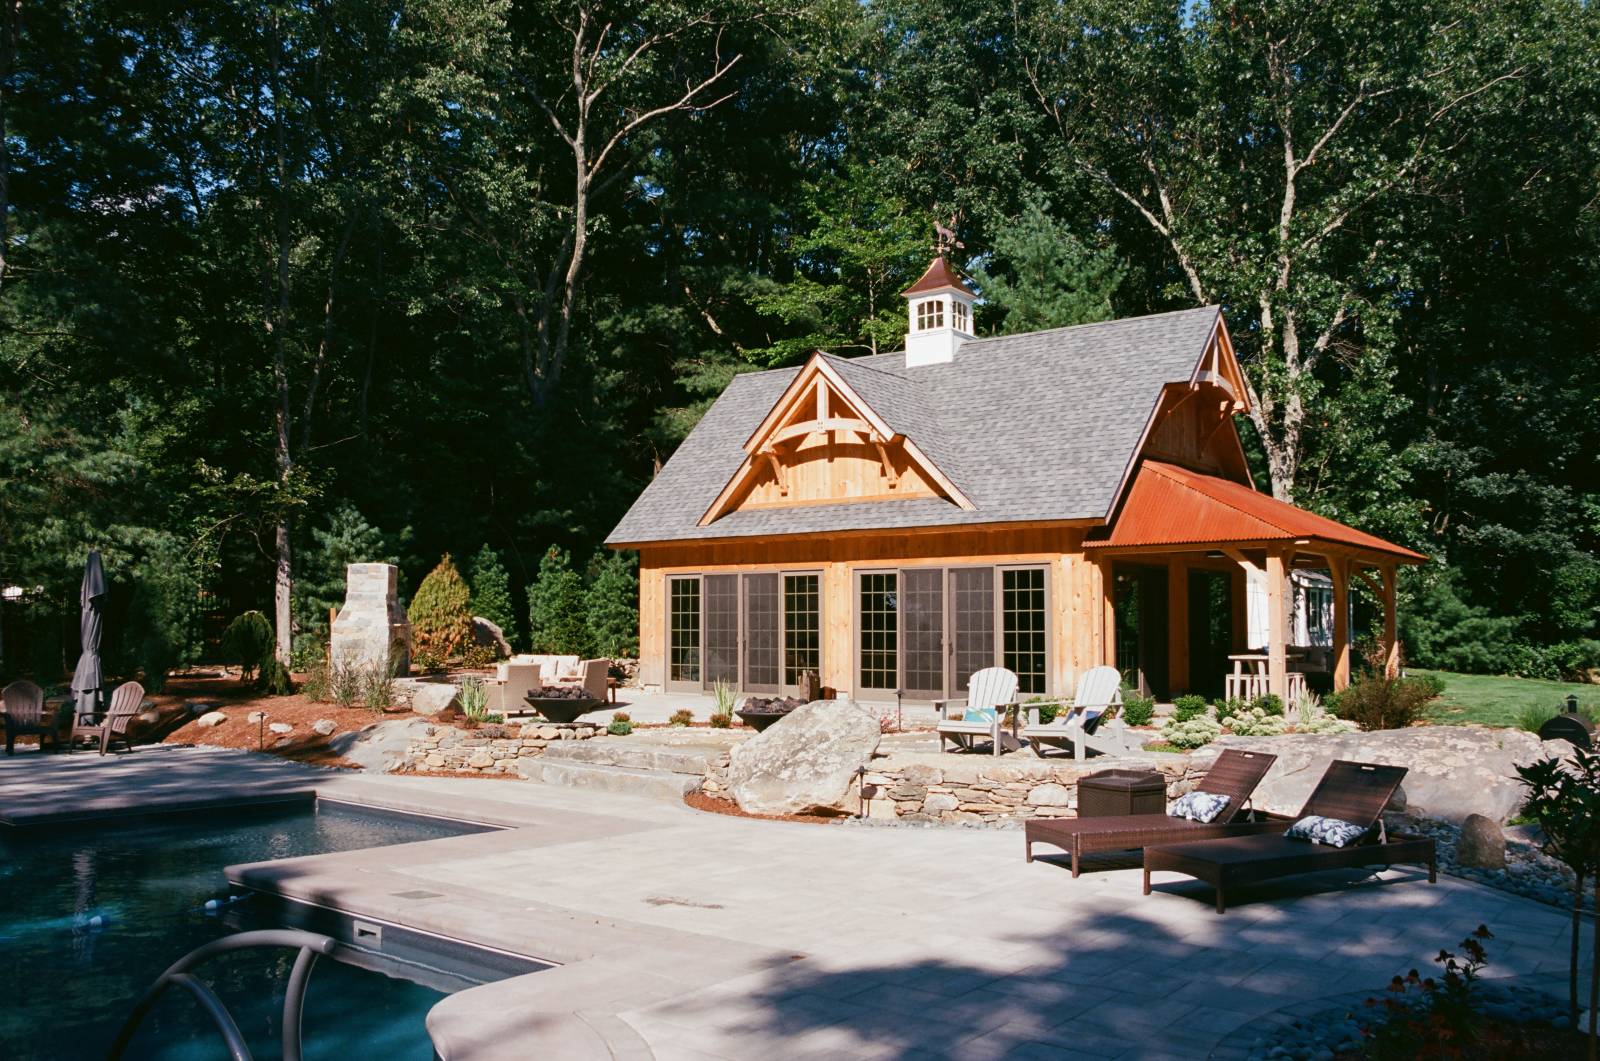 Timber Frame Accents on the Pool House • Custom Hardscape Surrounding the Pool